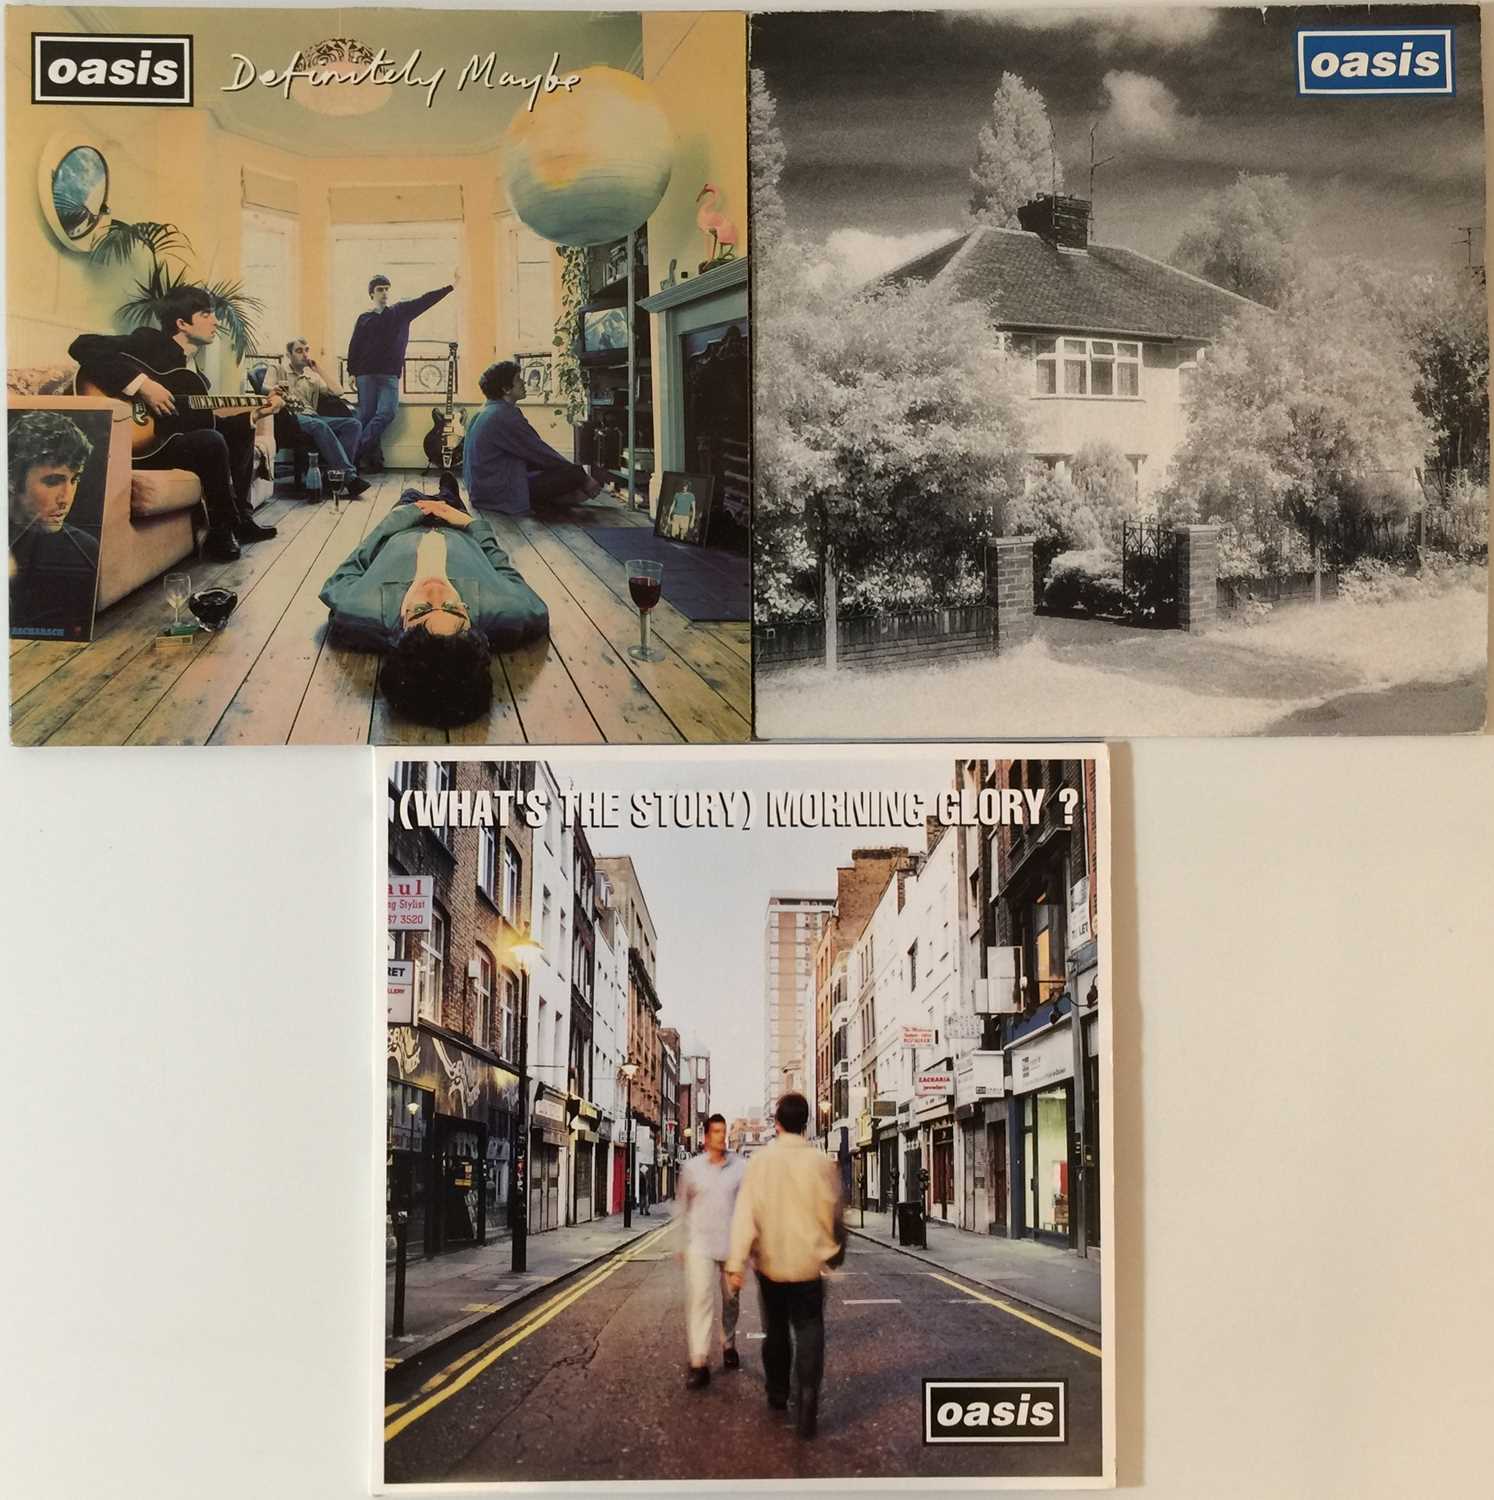 Lot 2 - OASIS - LPs & 12"